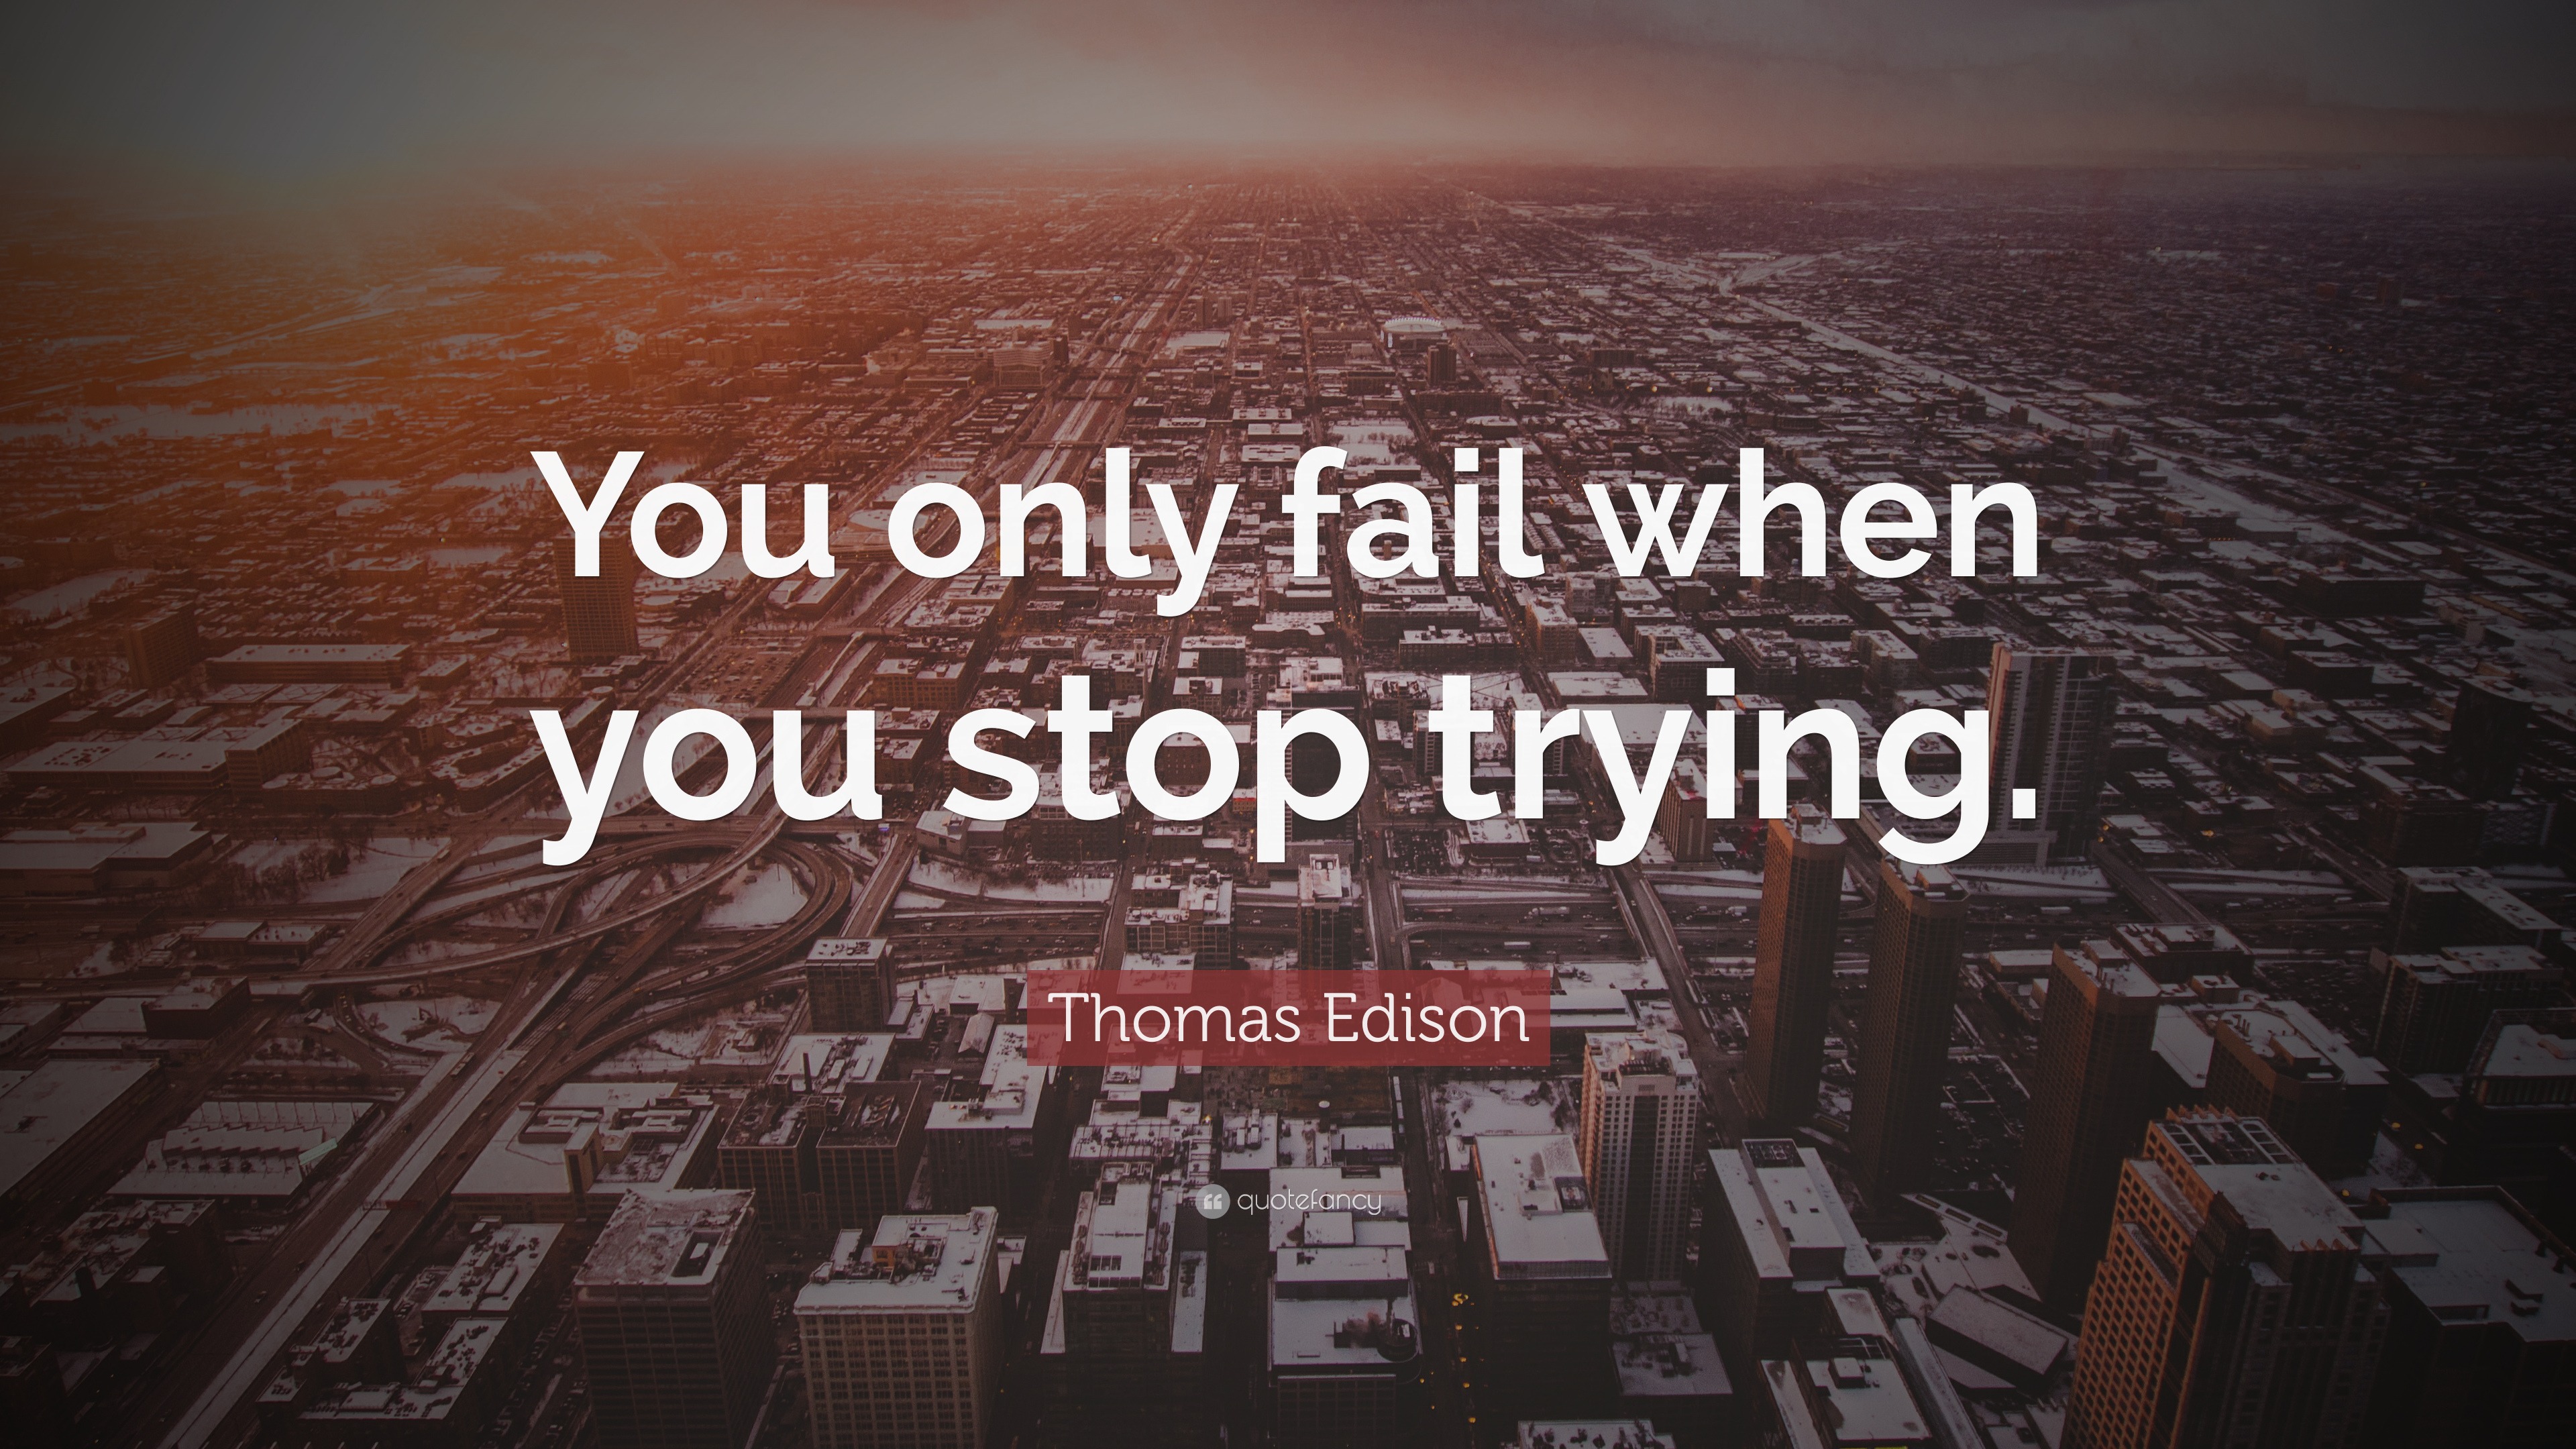 Thomas Edison Quote: “You only fail when you stop trying.”